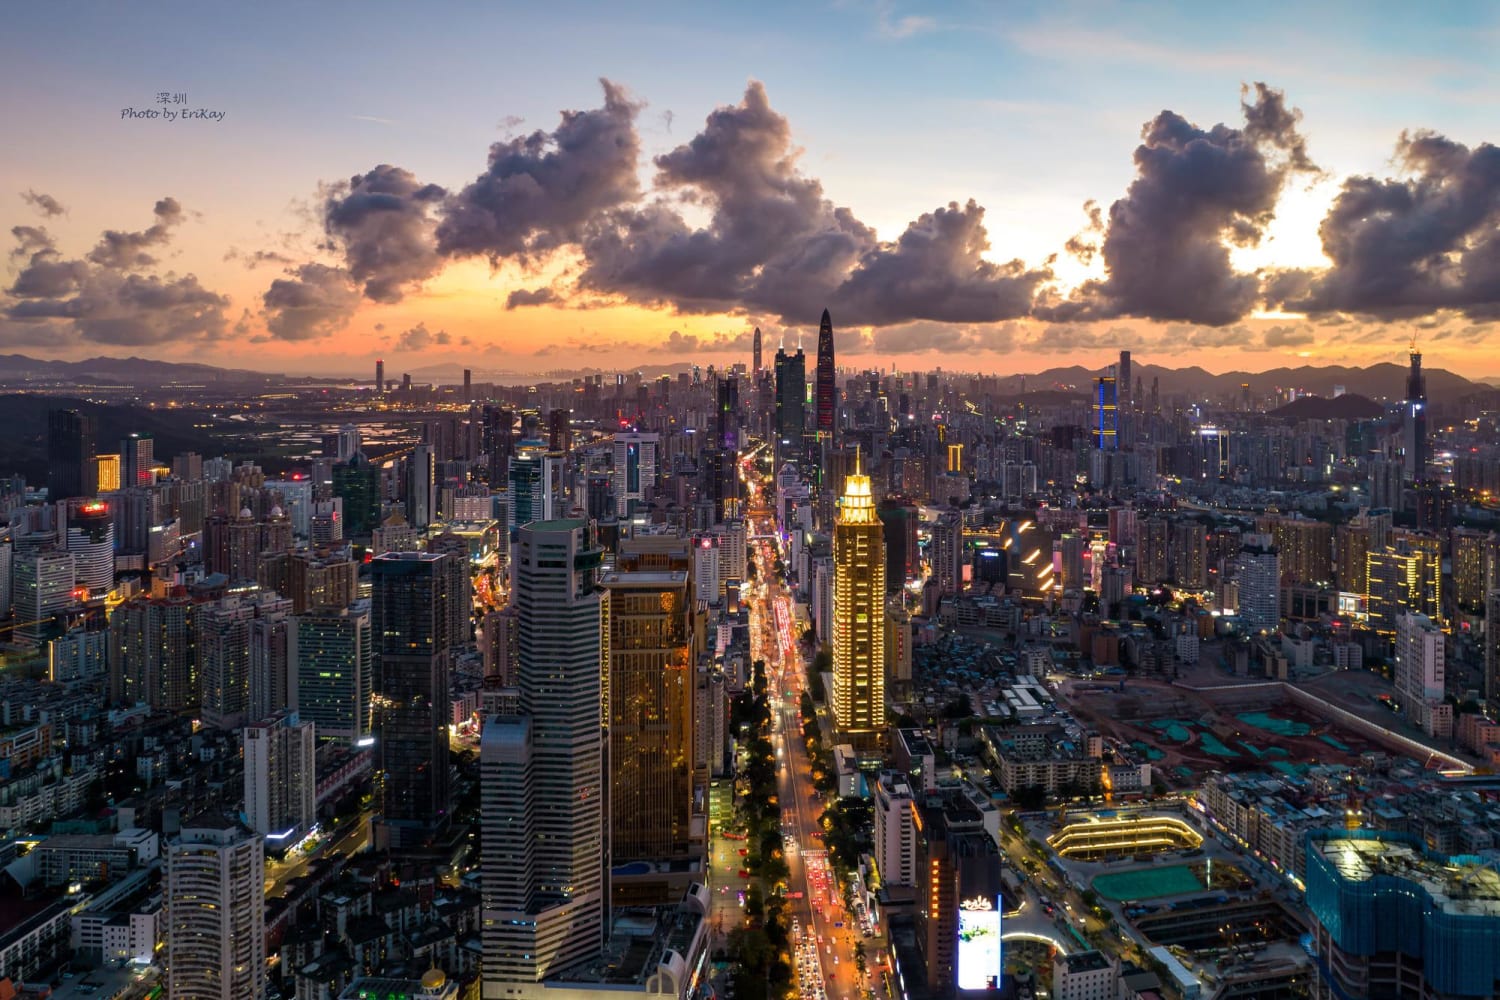 Evening falls over the immense skyline of Shenzhen. (photo by EriKay)